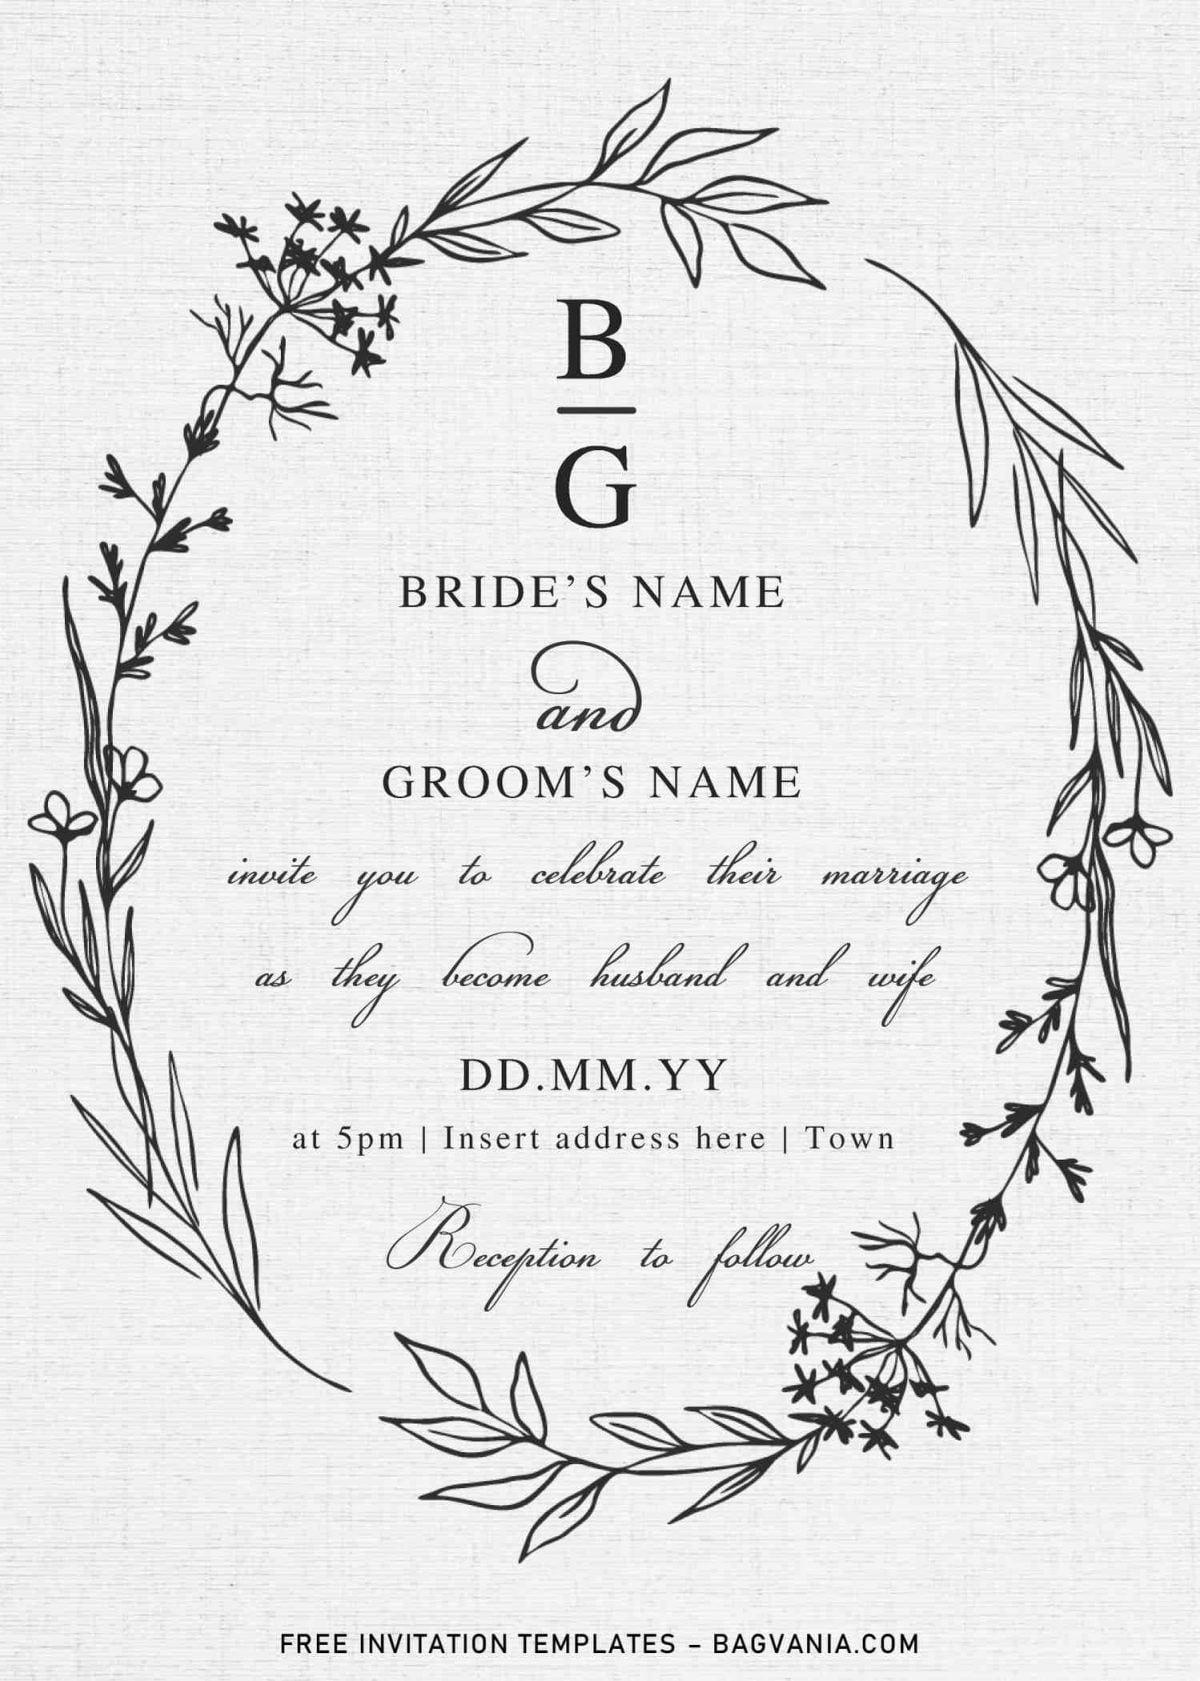 Free Floral Monogram Wedding Invitation Templates For Word and has portrait orientation